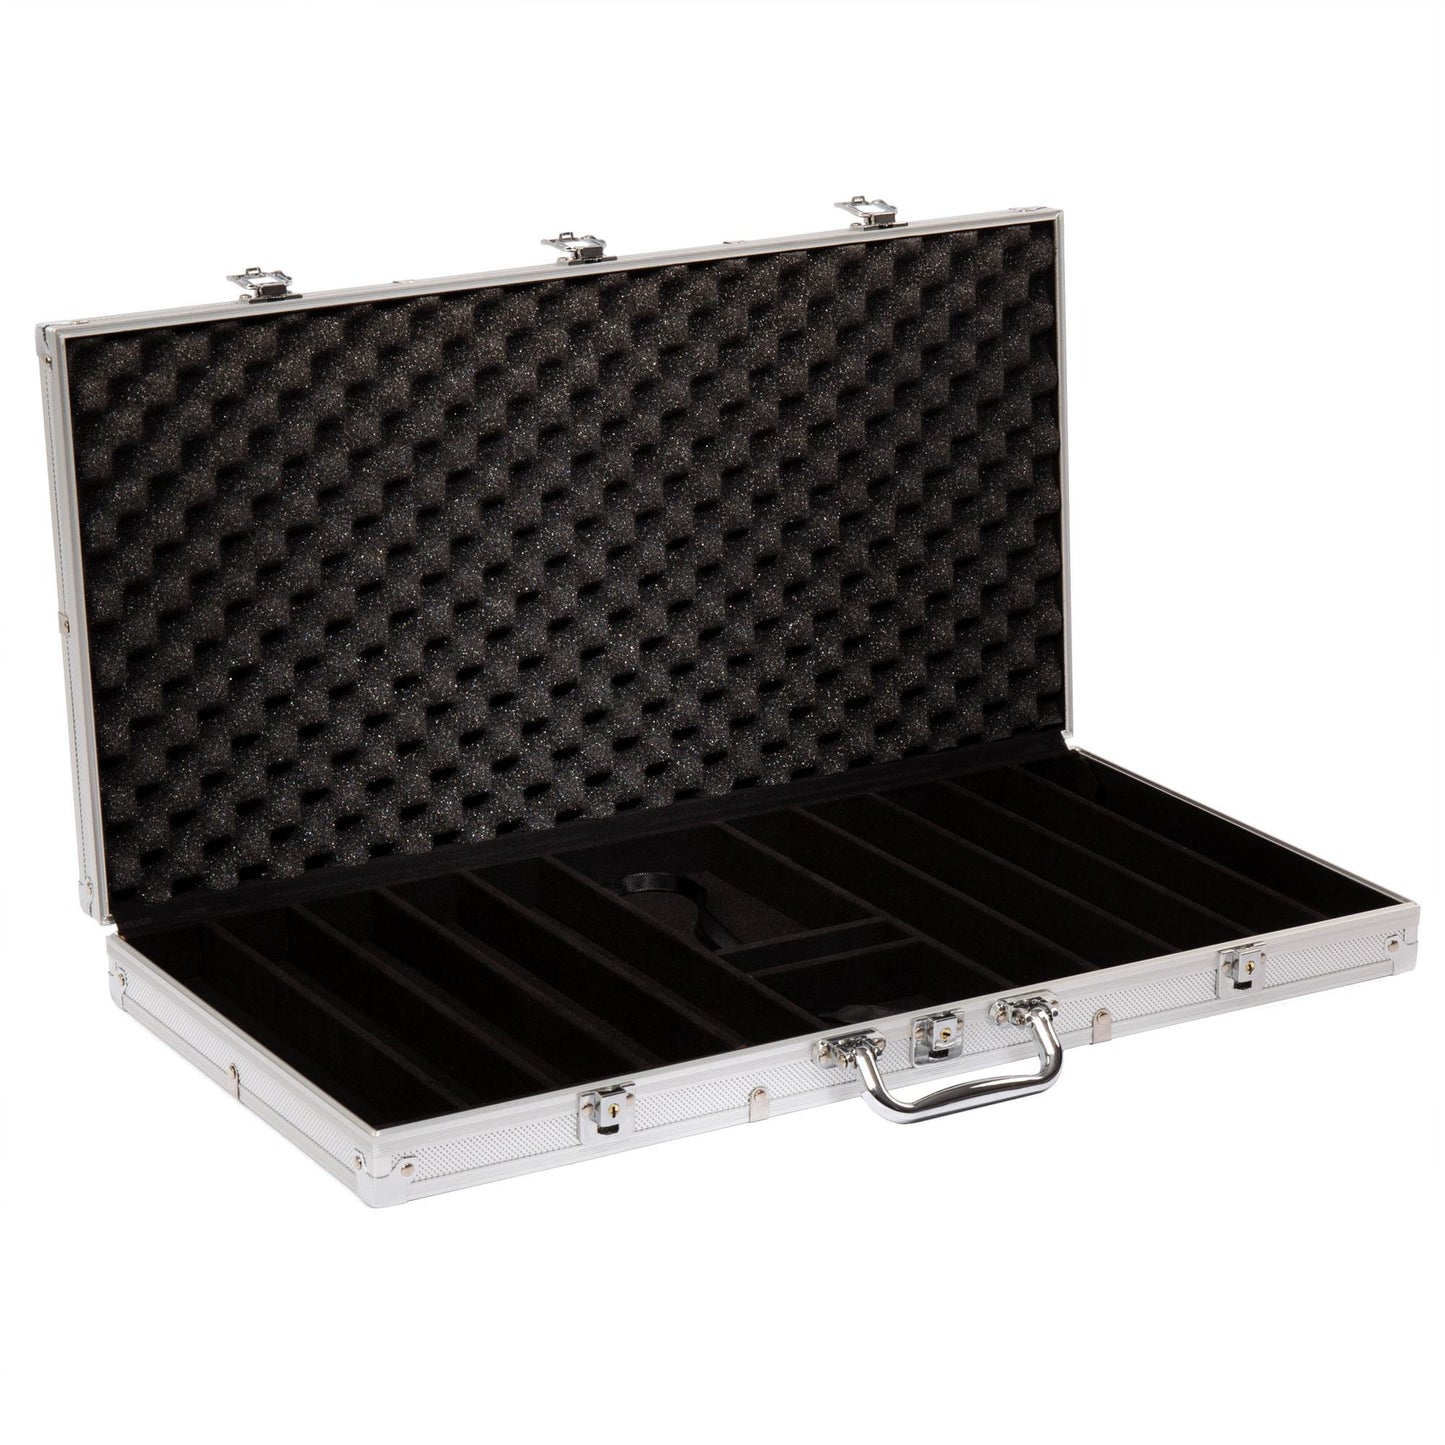 750 Scroll Poker Chips with Aluminum Case